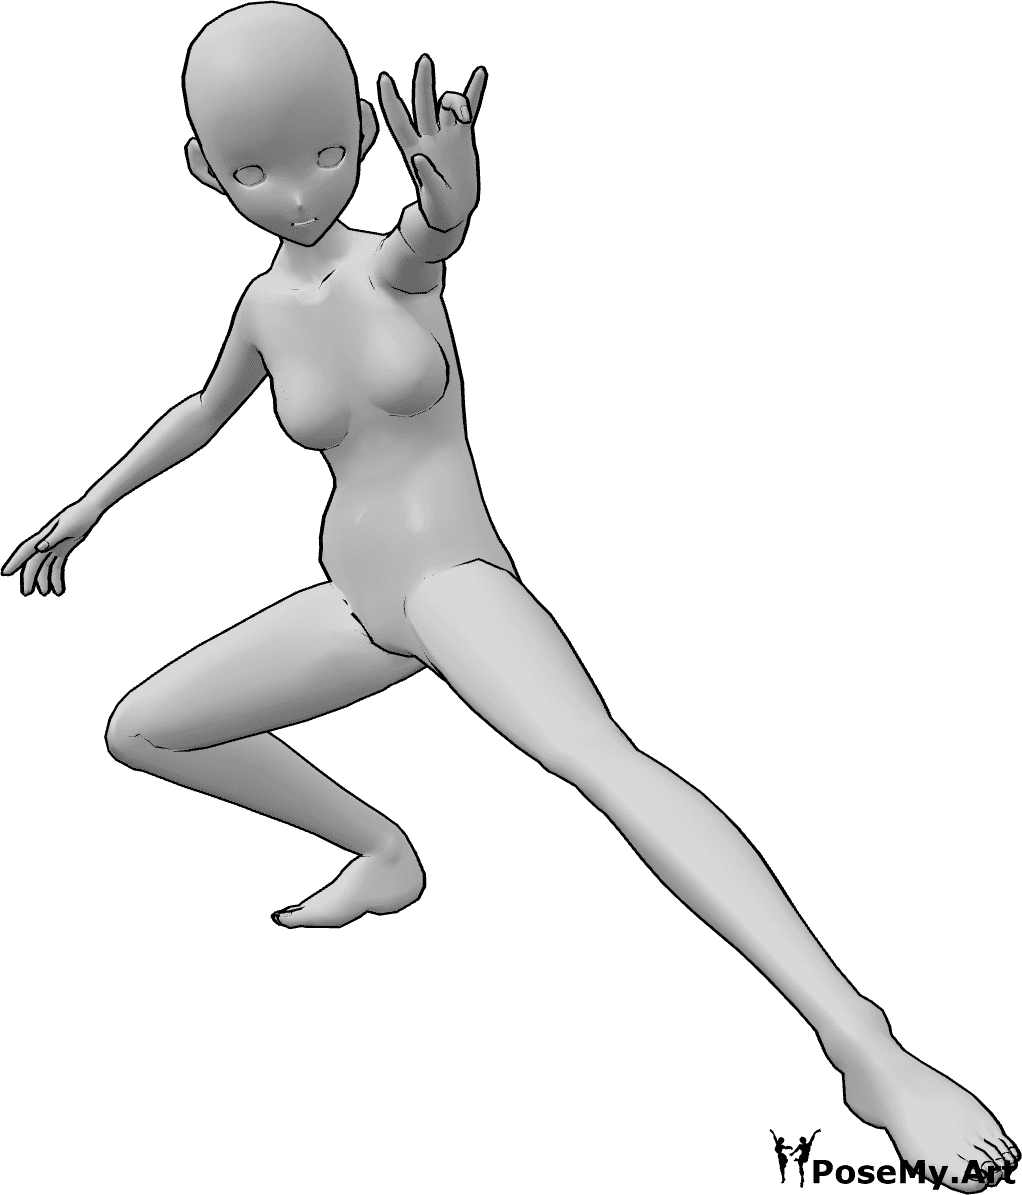 Pose Reference- Anime spell casting pose - Anime female is squatting and casting a spell with her left hand